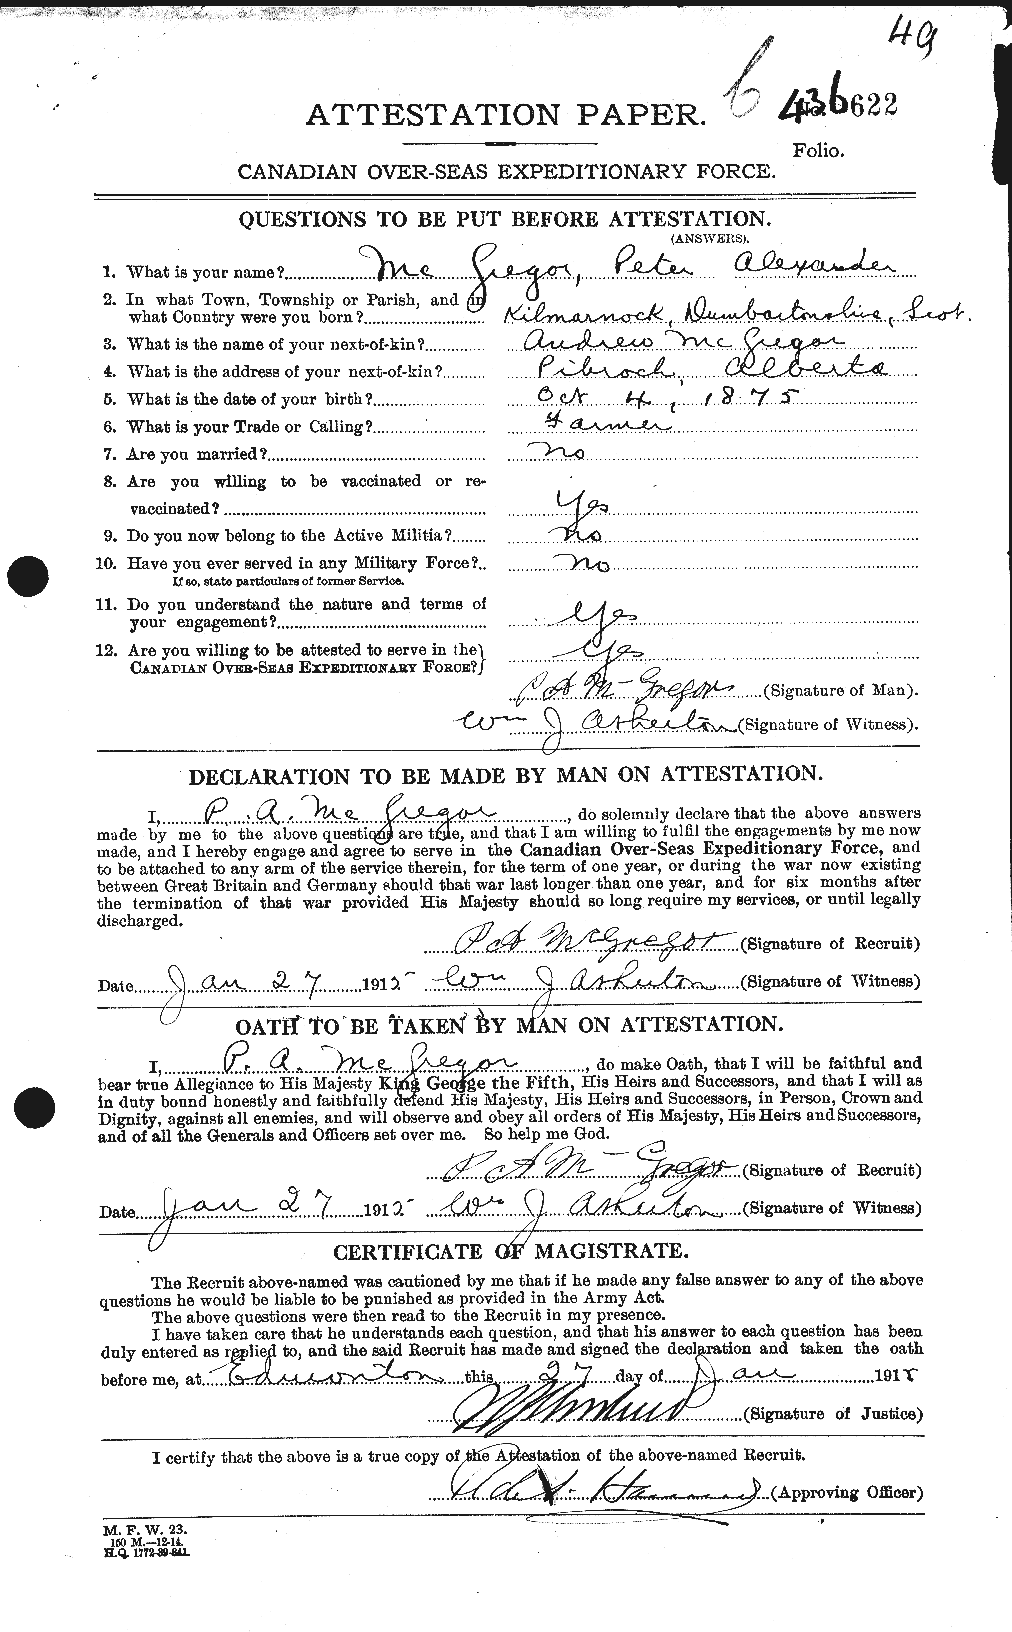 Personnel Records of the First World War - CEF 526147a